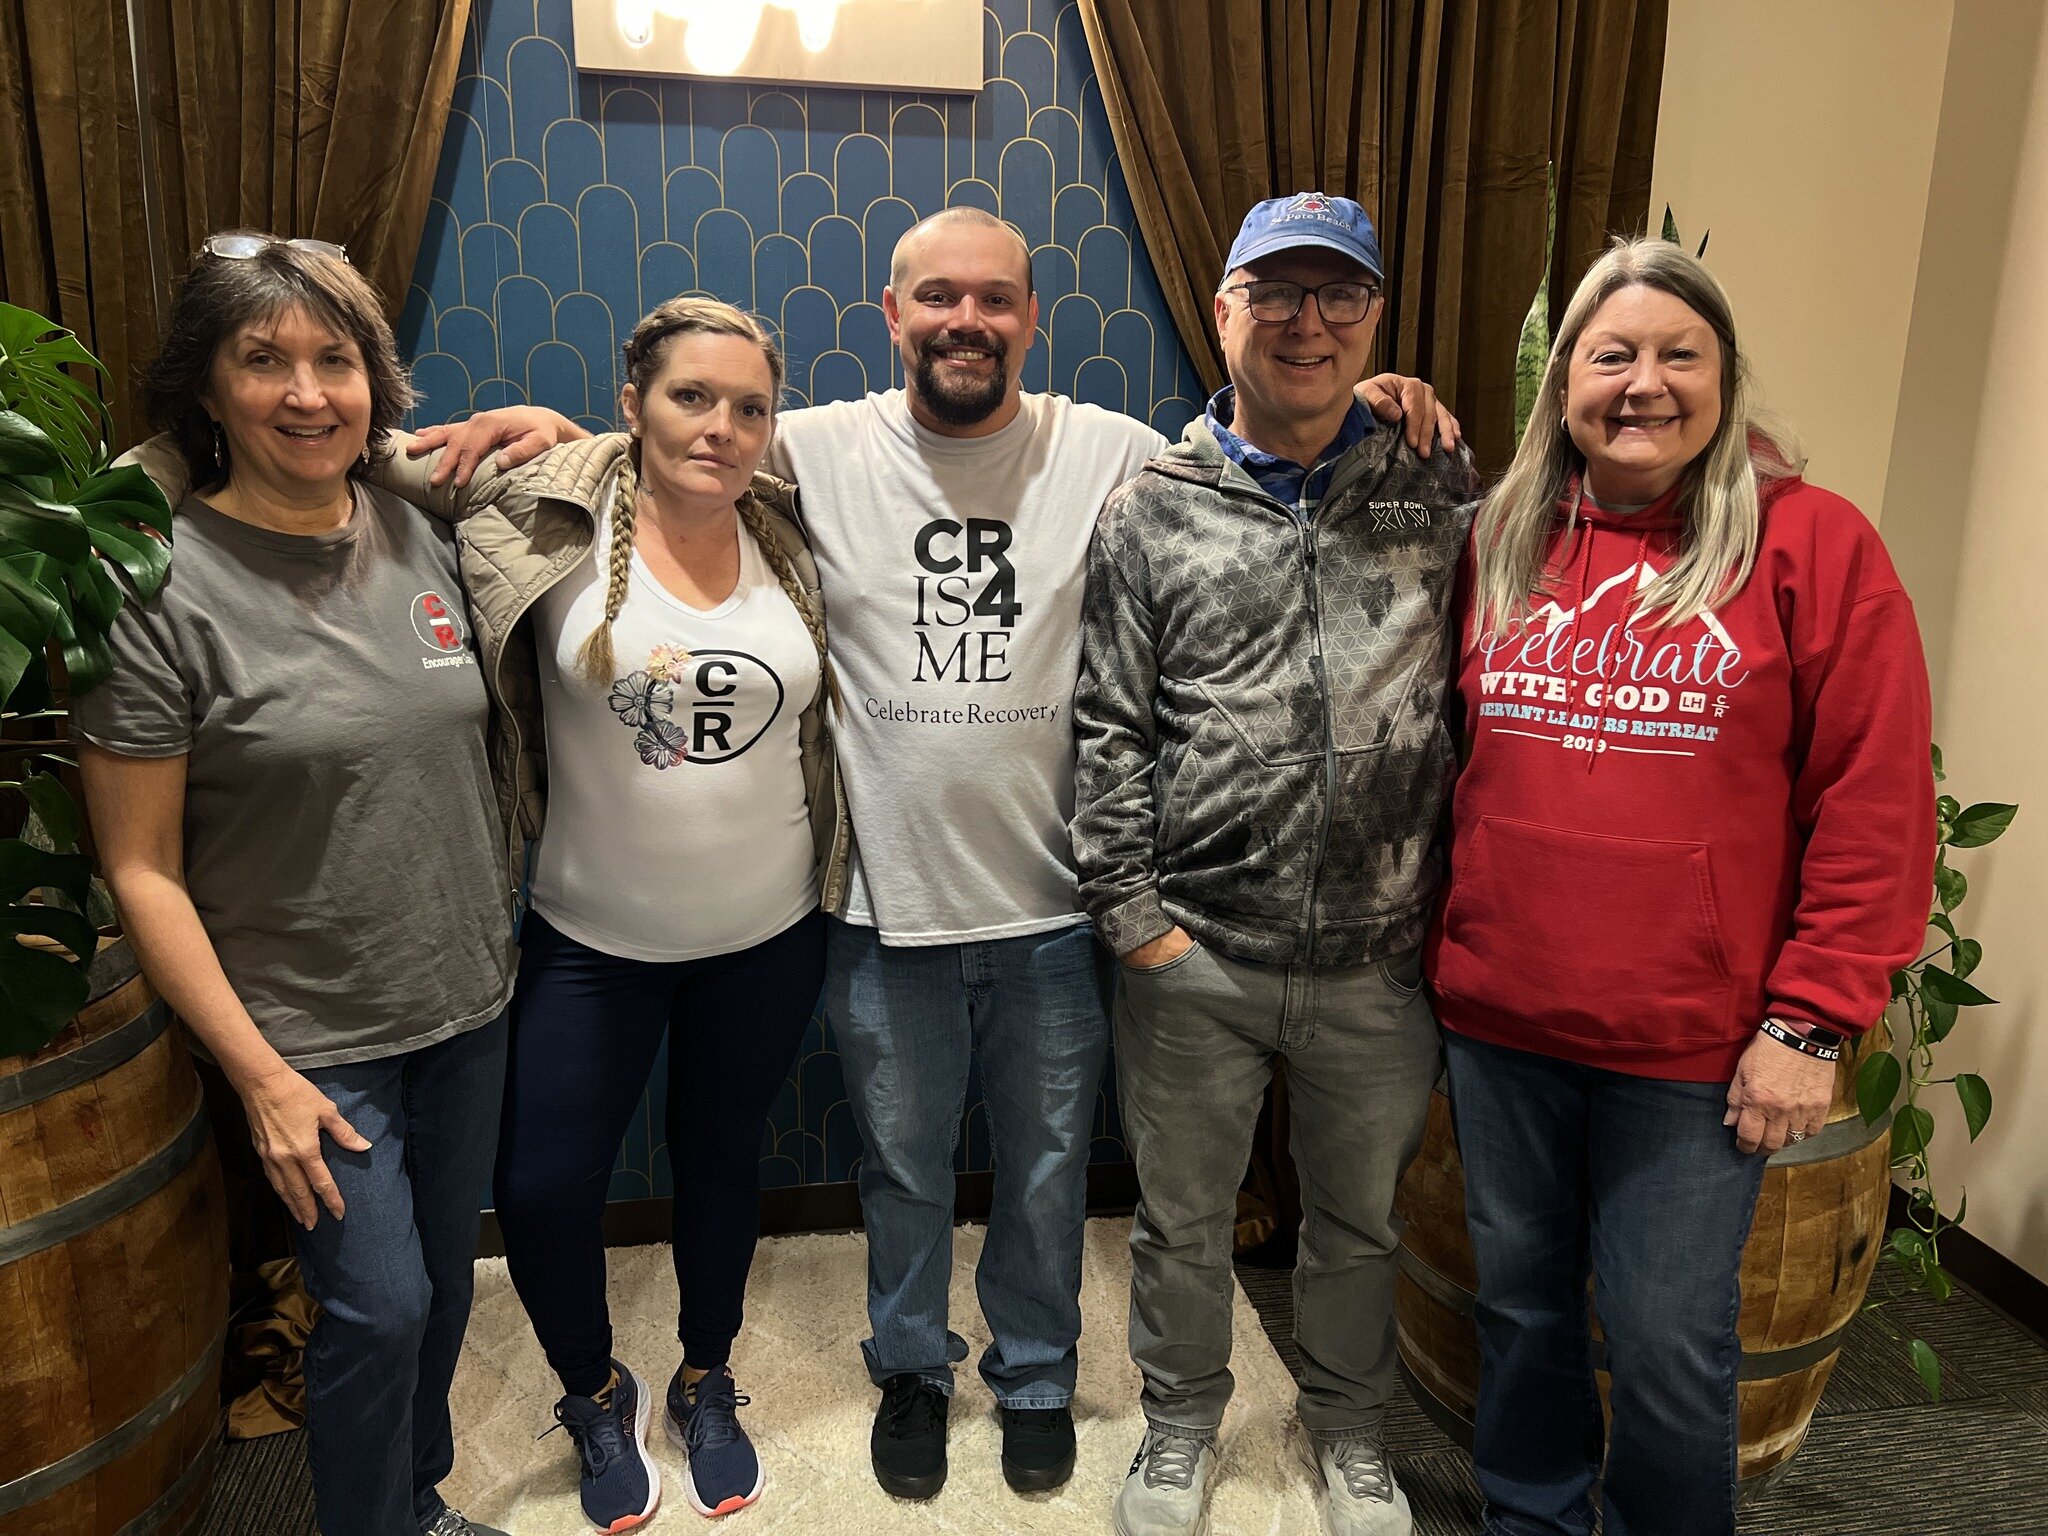 We wanted to take a moment to shine a spotlight on some wonderful individuals who have shown so many love and hope in Jesus through the Celebrate Recovery ministry.

They have been leading the charge in fostering healing, growth, and transformation o